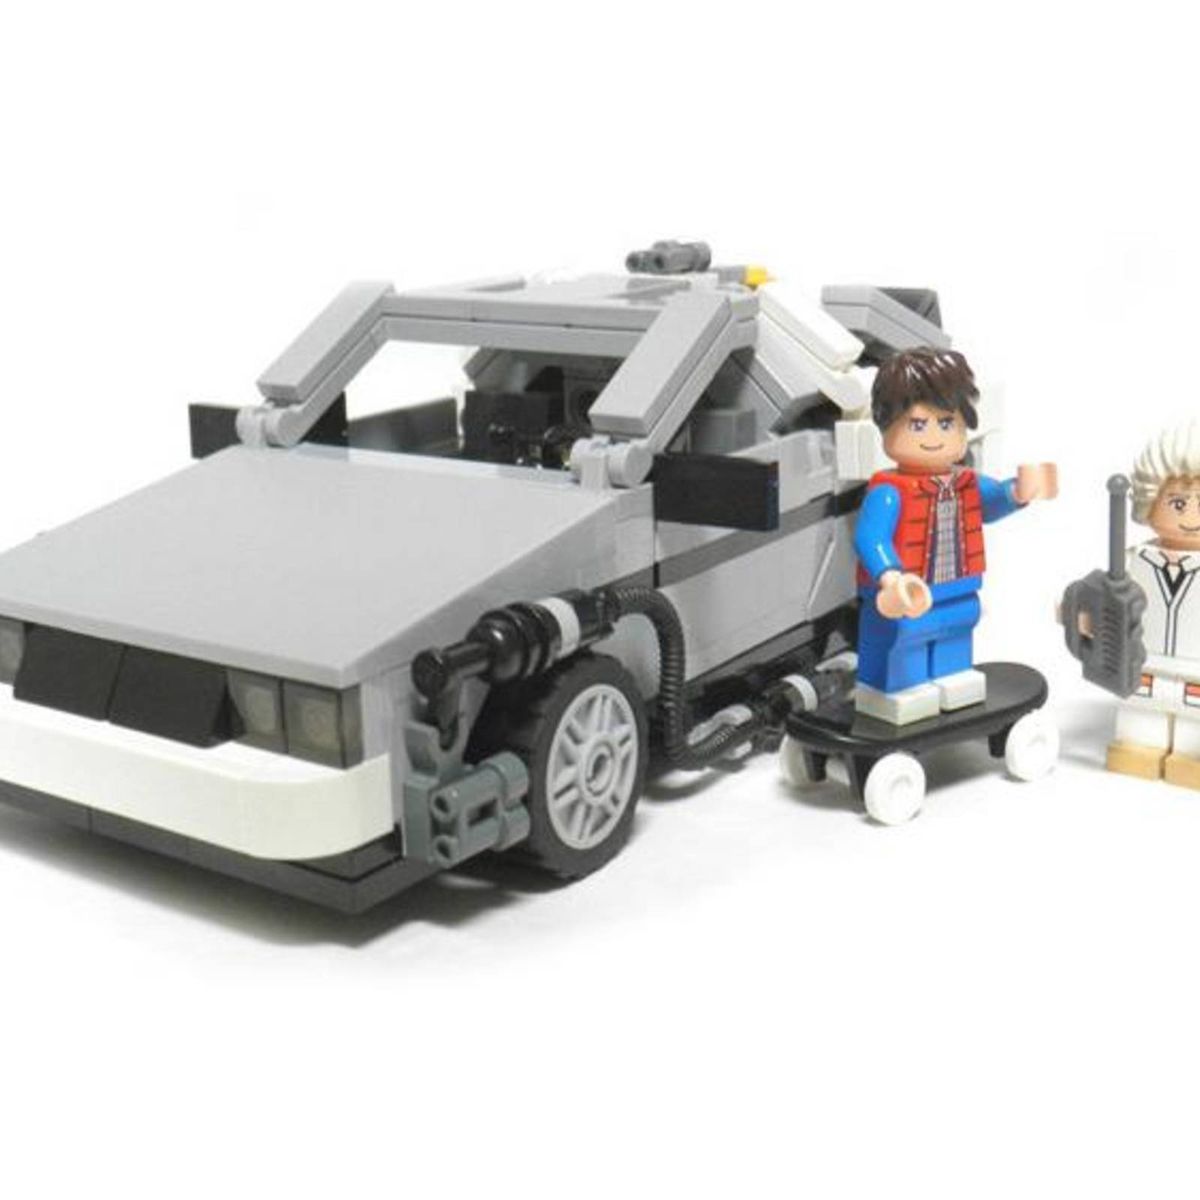 LEGO CUUSOO Back to the Future DeLorean [Review] - The Brothers Brick